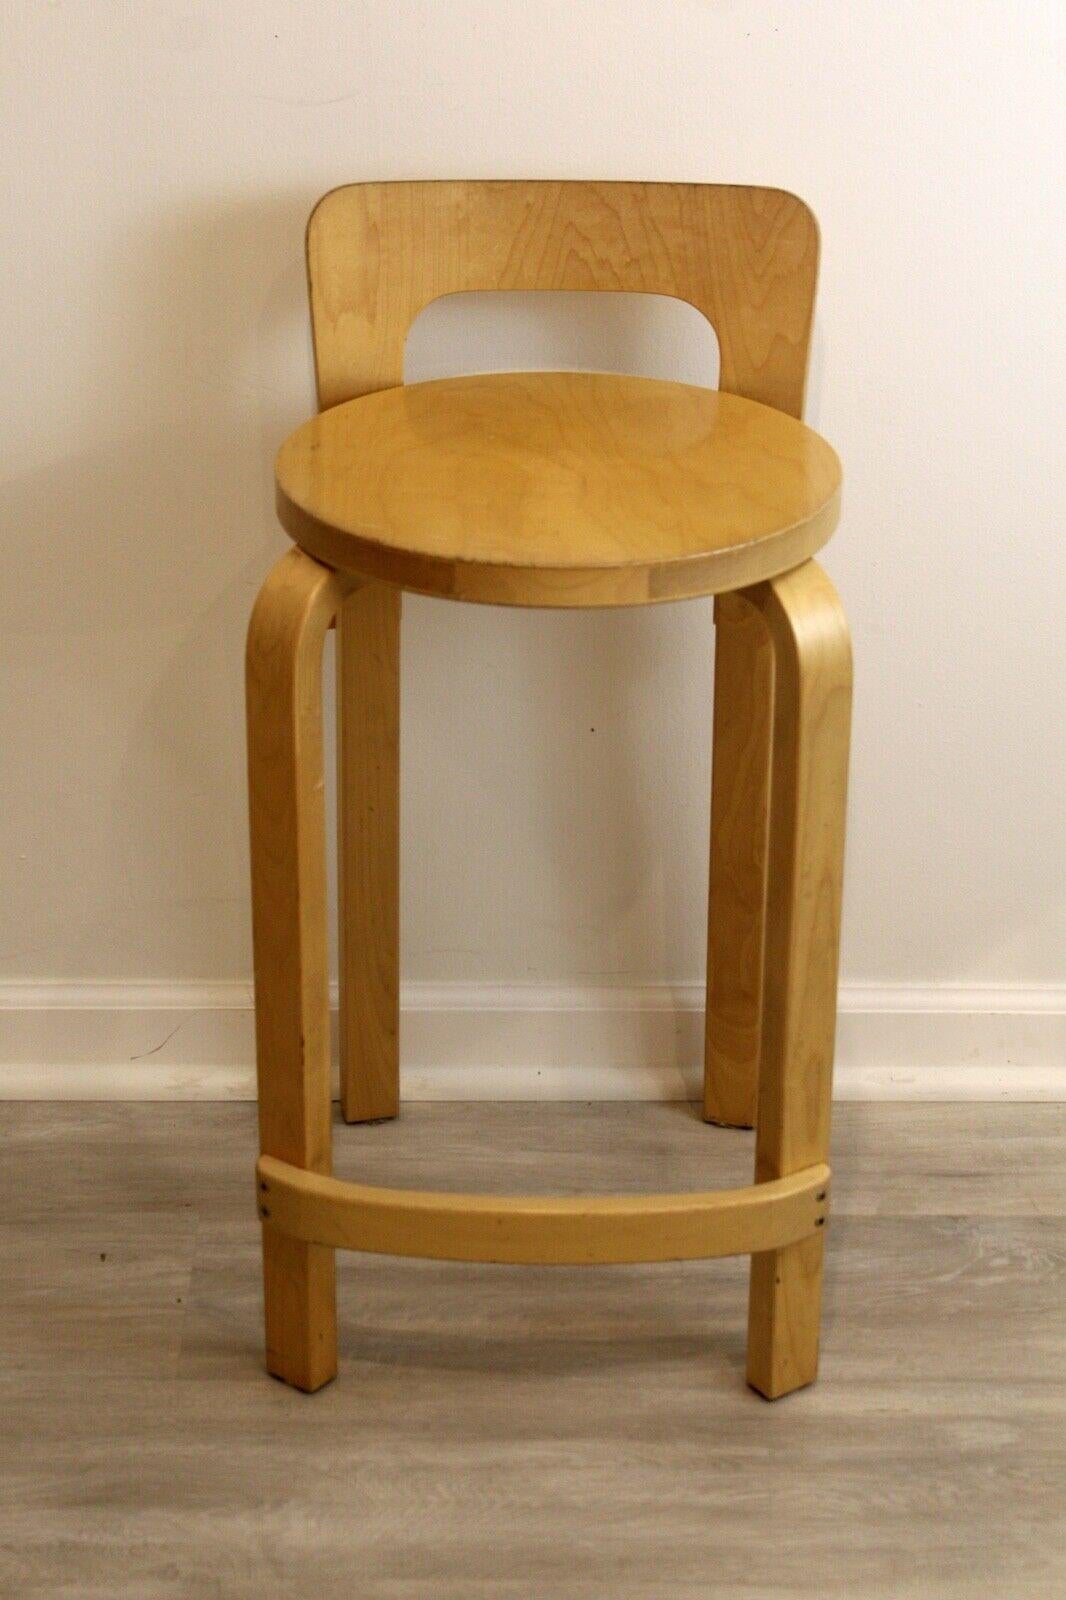 Le Shoppe Too presents set of 5 Bentwood barstools. Artek’s high chair K65 was designed by Alvar Aalto in 1935. The chair features birch legs and a low back made of bent birch plywood. In vintage condition. Dimensions: 13.5